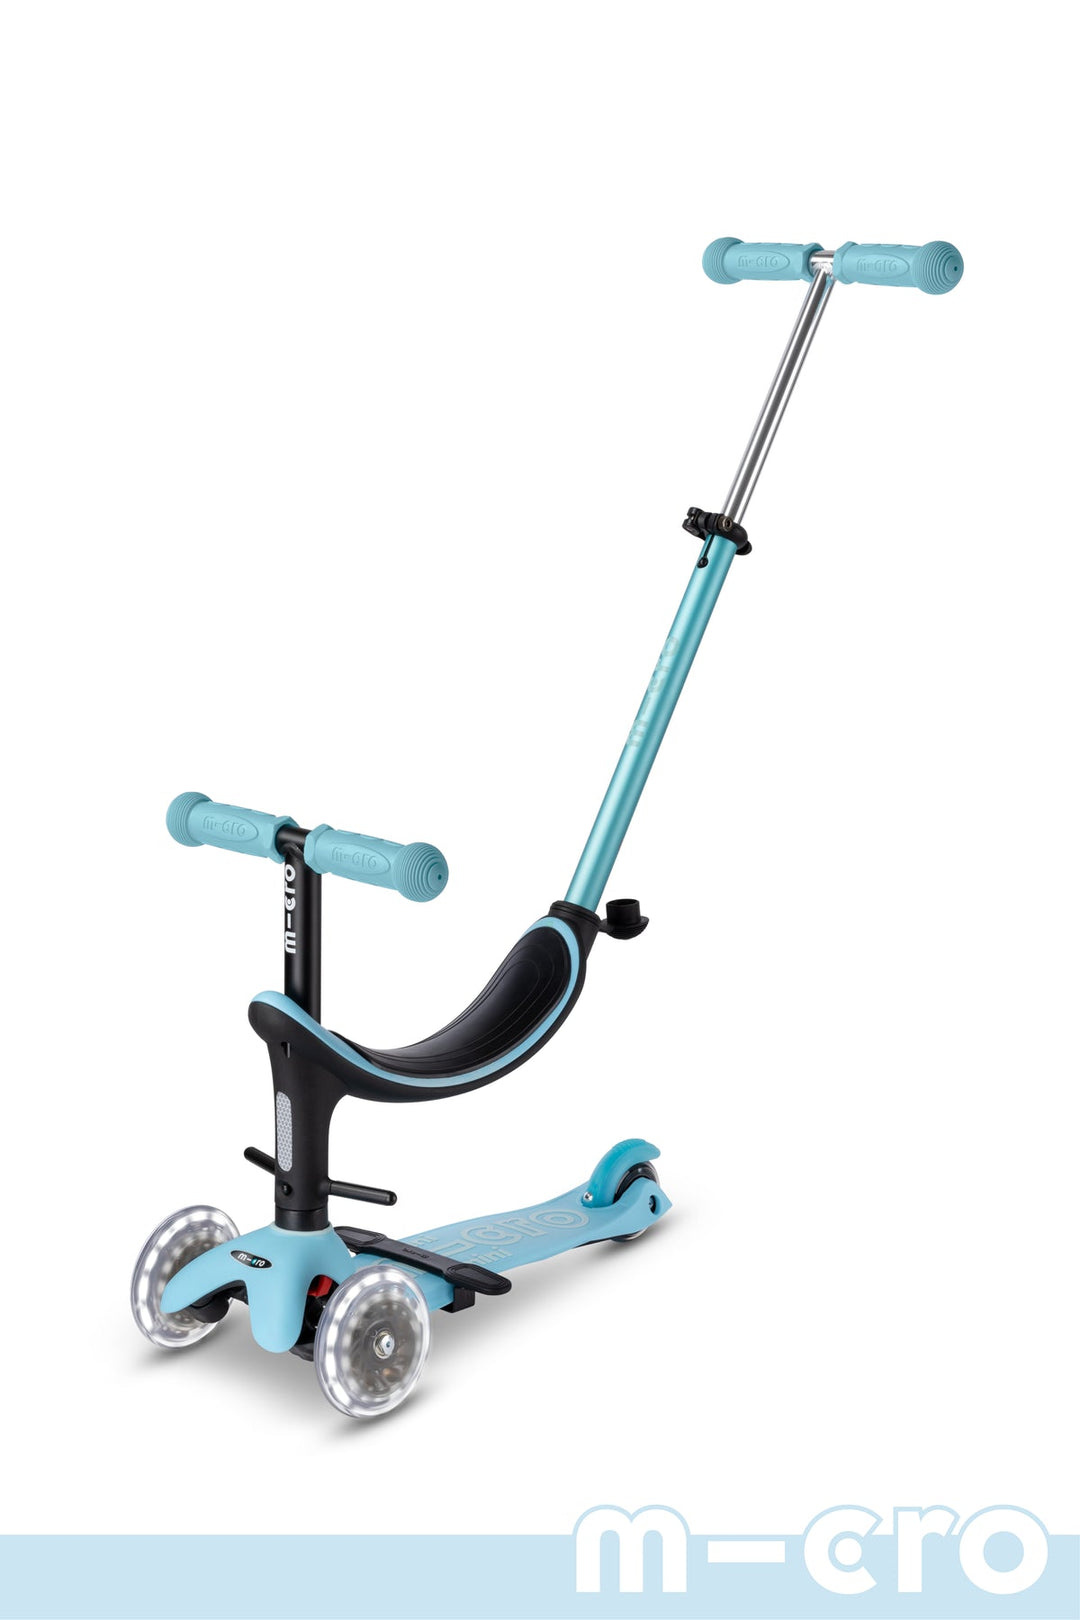 >Micro Kids Mini2Grow LED Scooter Ages 1-6 [more colors]